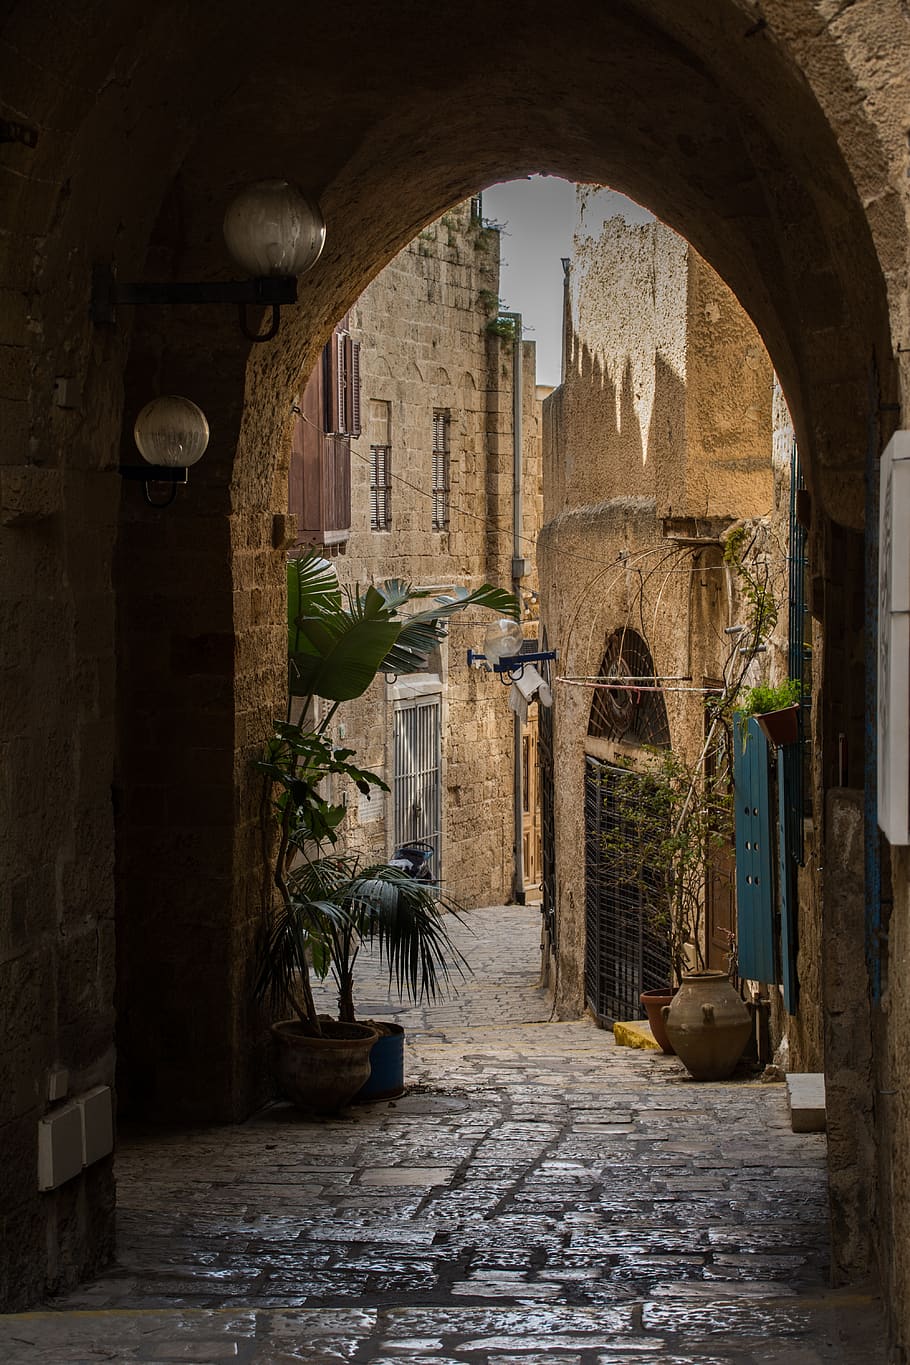 architecture, jaffa, old street, old town, road, city, building